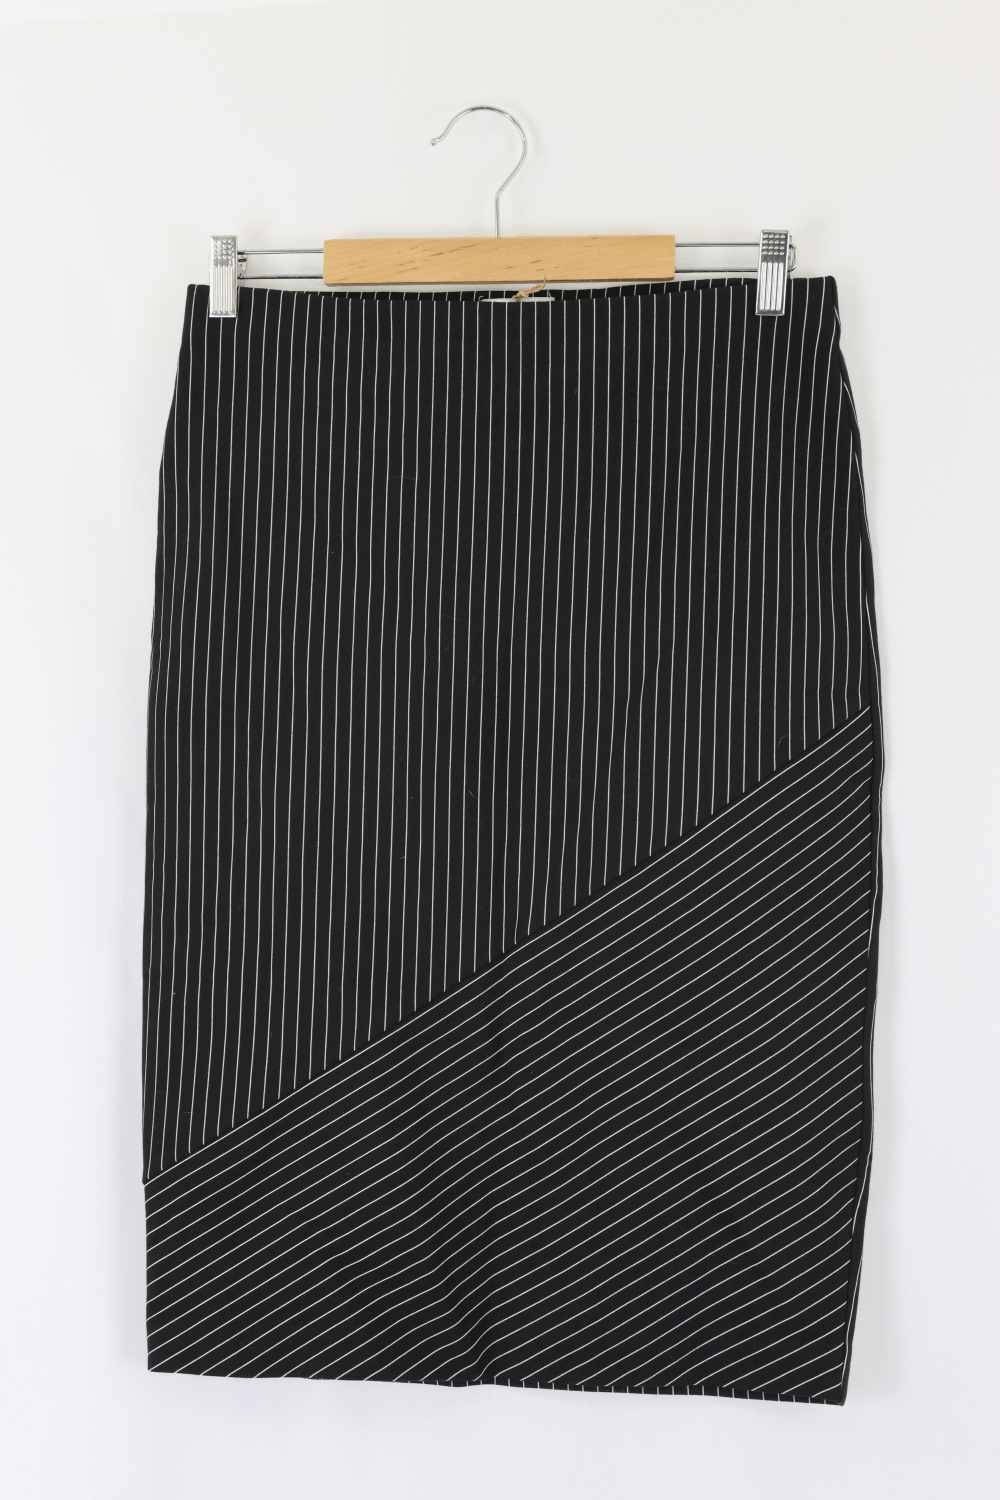 Witchery Black and White Striped Skirt 12